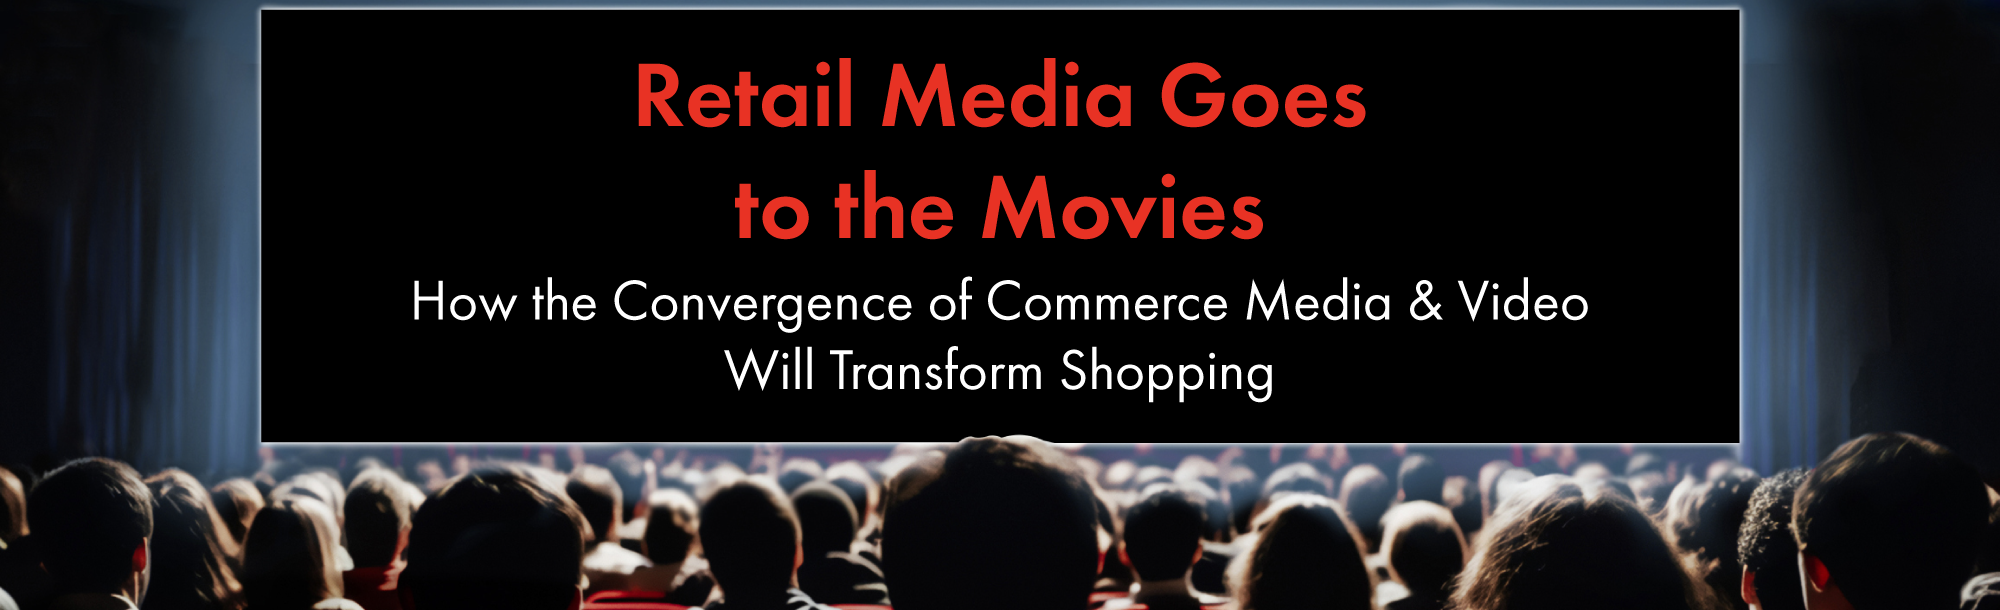 Retail Media Goes to the Movies